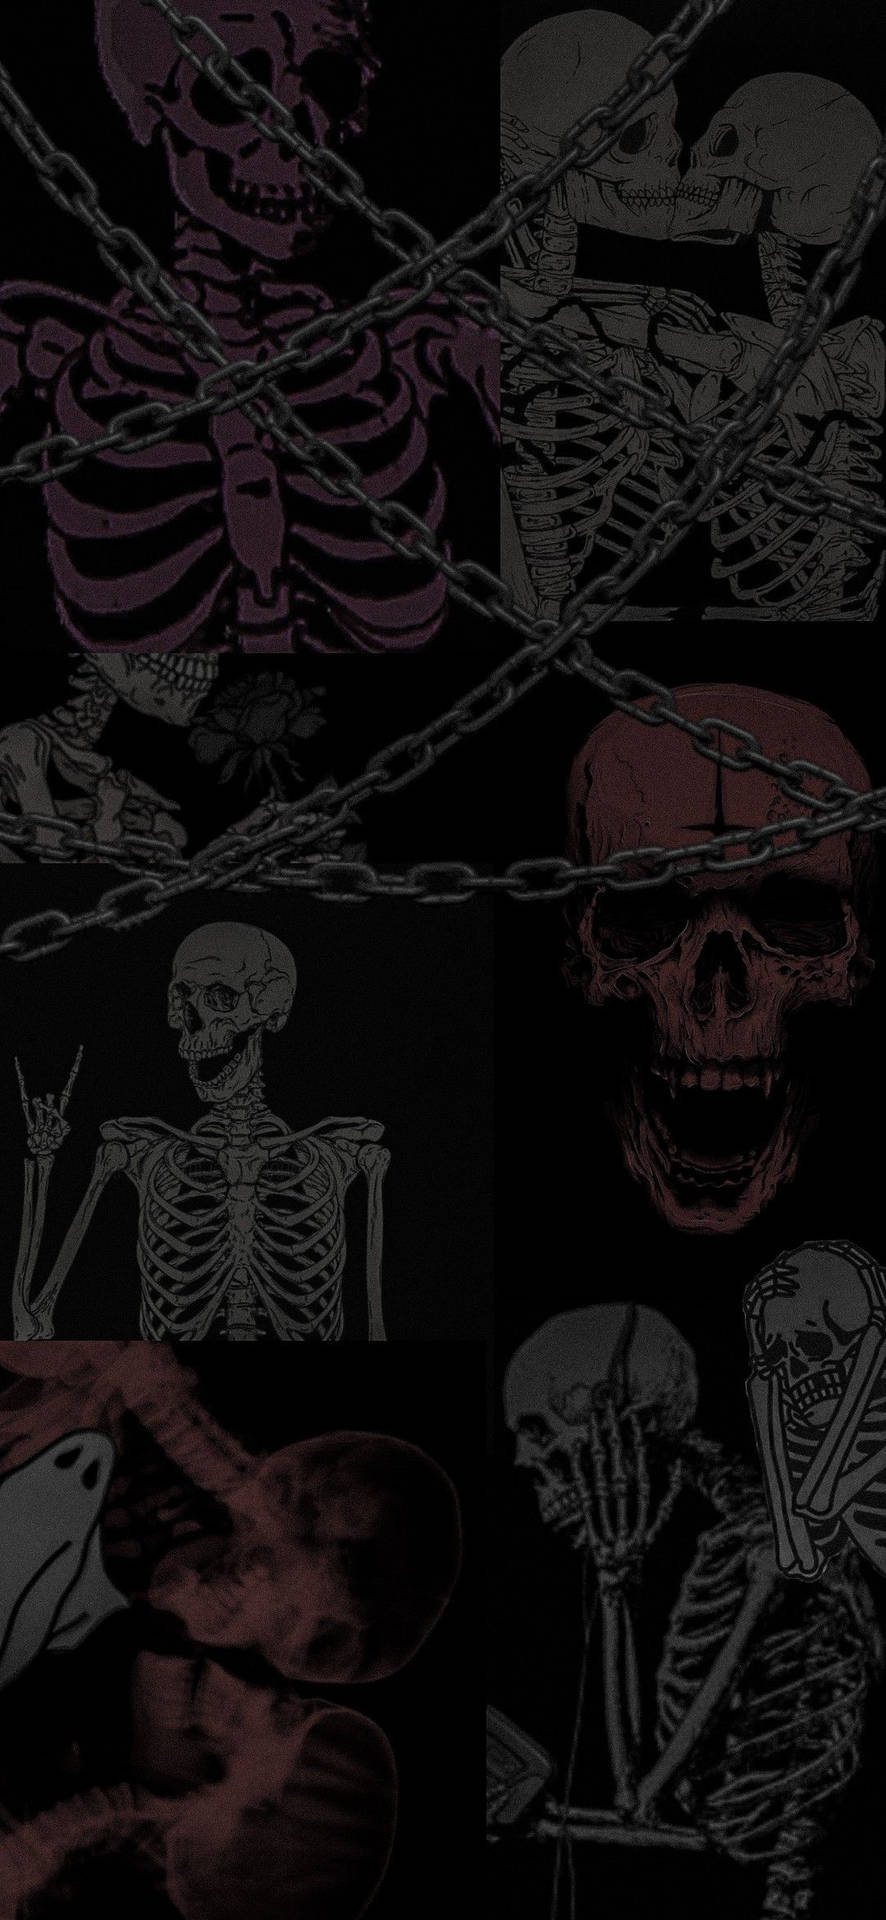 A Black Background With Skeletons And Chains Wallpaper